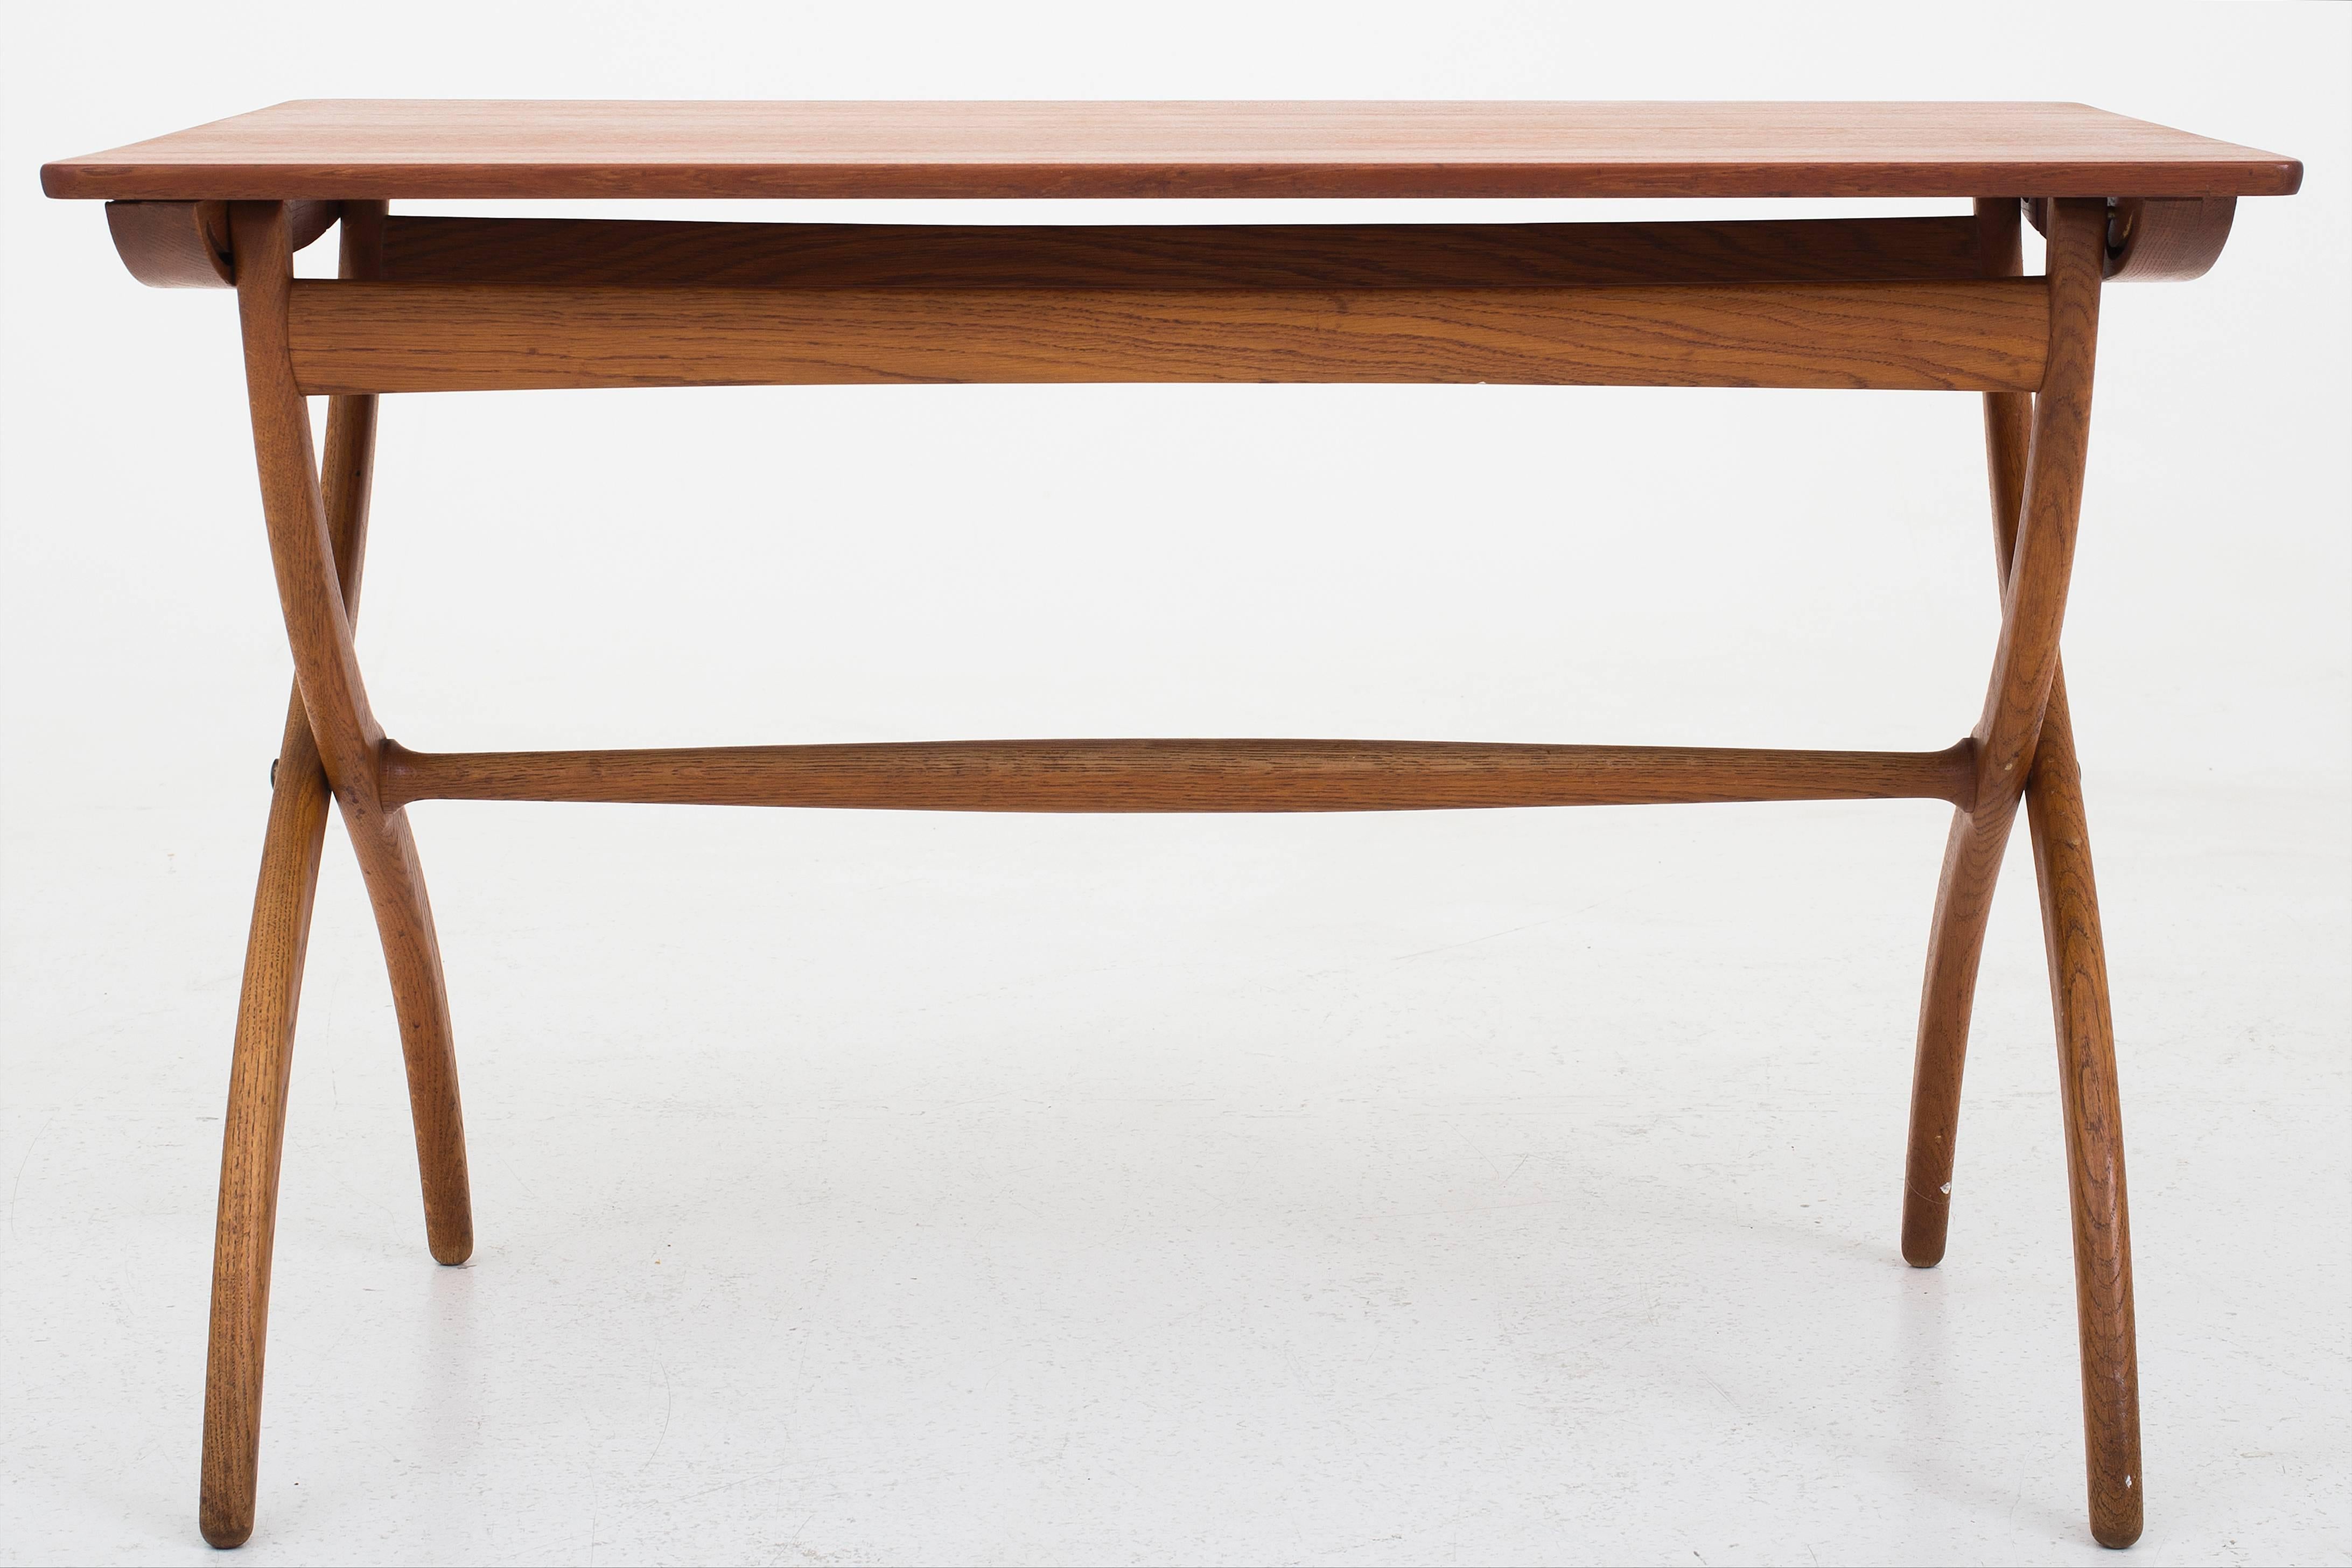 Folding coffee table with teak top and curved oak legs. Produced by Rud Rasmussen, Denmark.